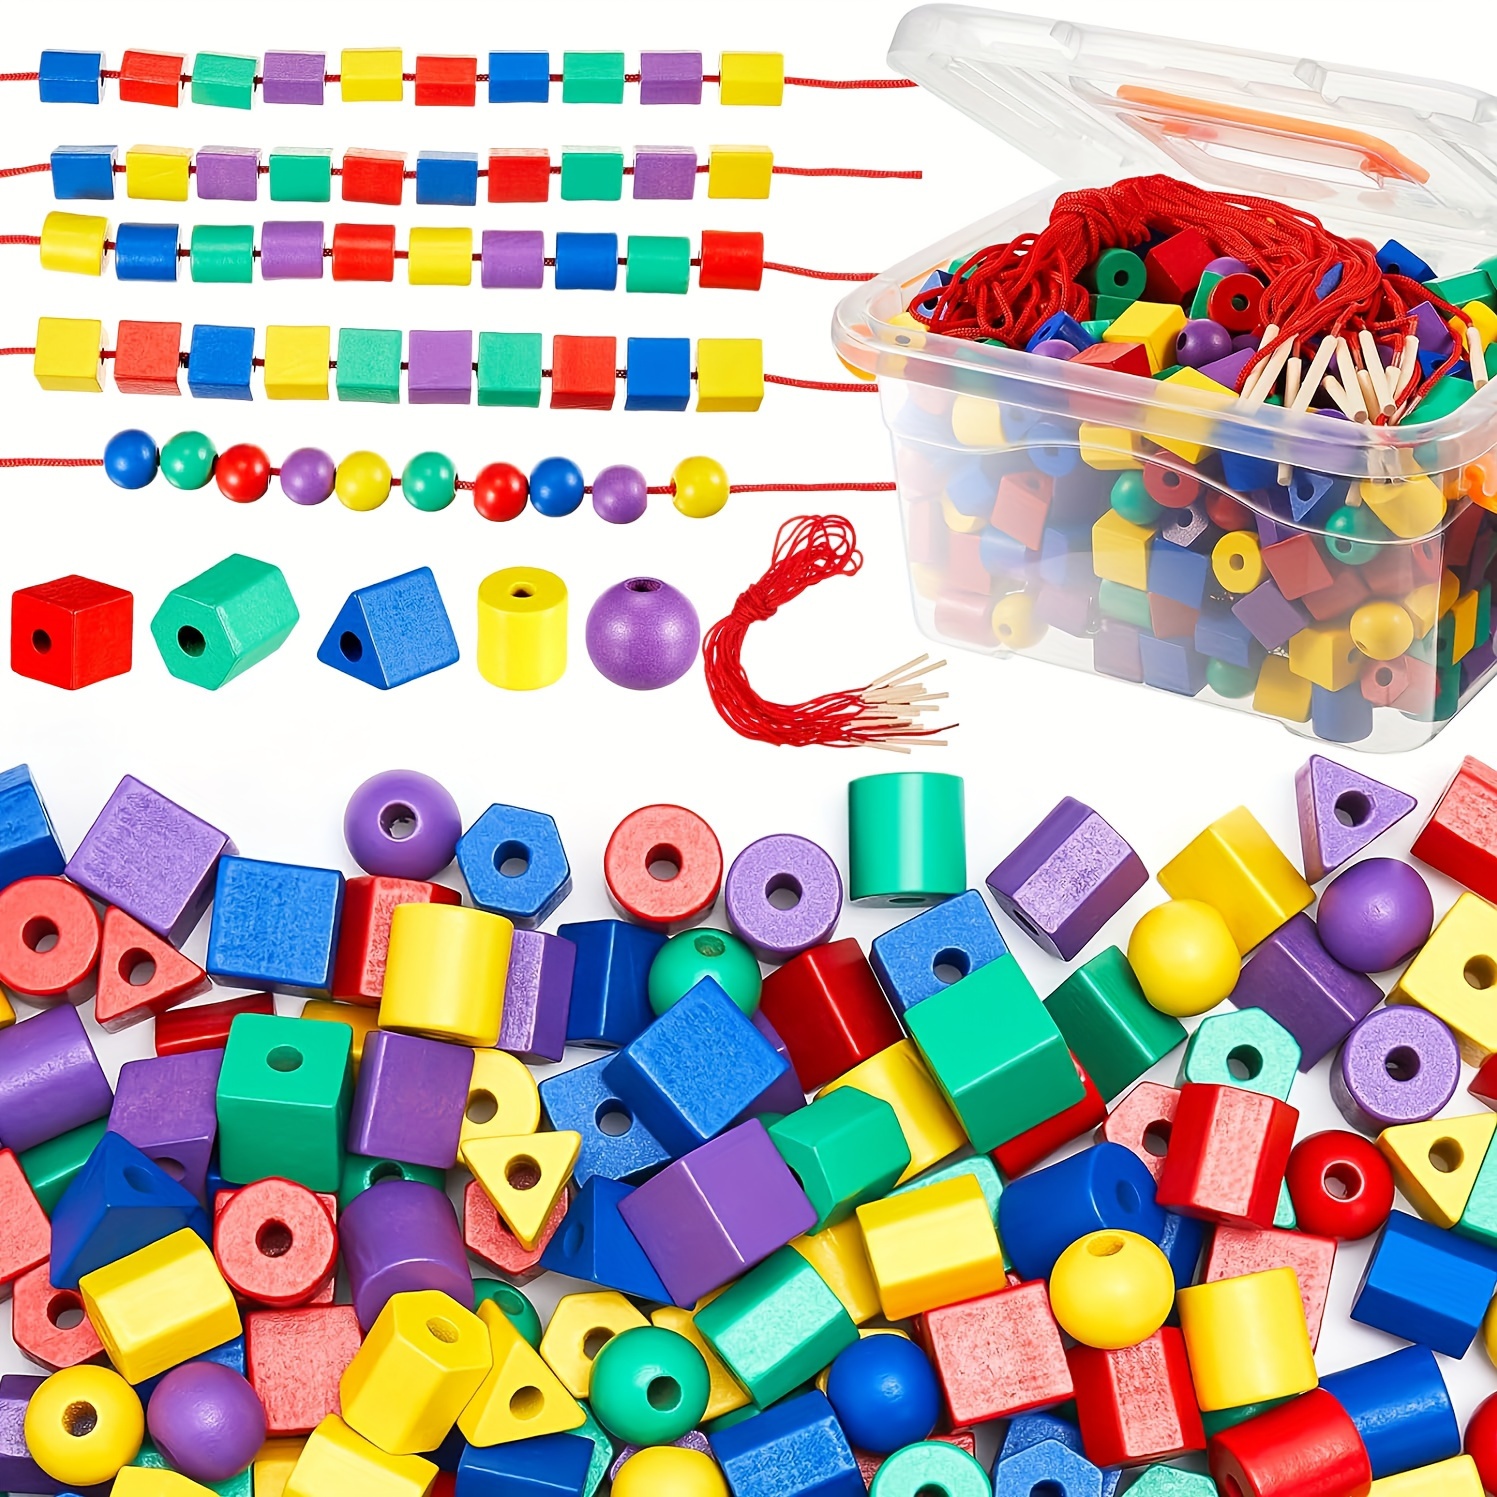 

80-piece Montessori Lacing Beads Set For Toddlers - Color & Shape Sorting, Includes String & Bag - Perfect For Preschool Occupational Therapy & Sewing Crafts Bead Embroidery Kit Waist Beads Making Kit